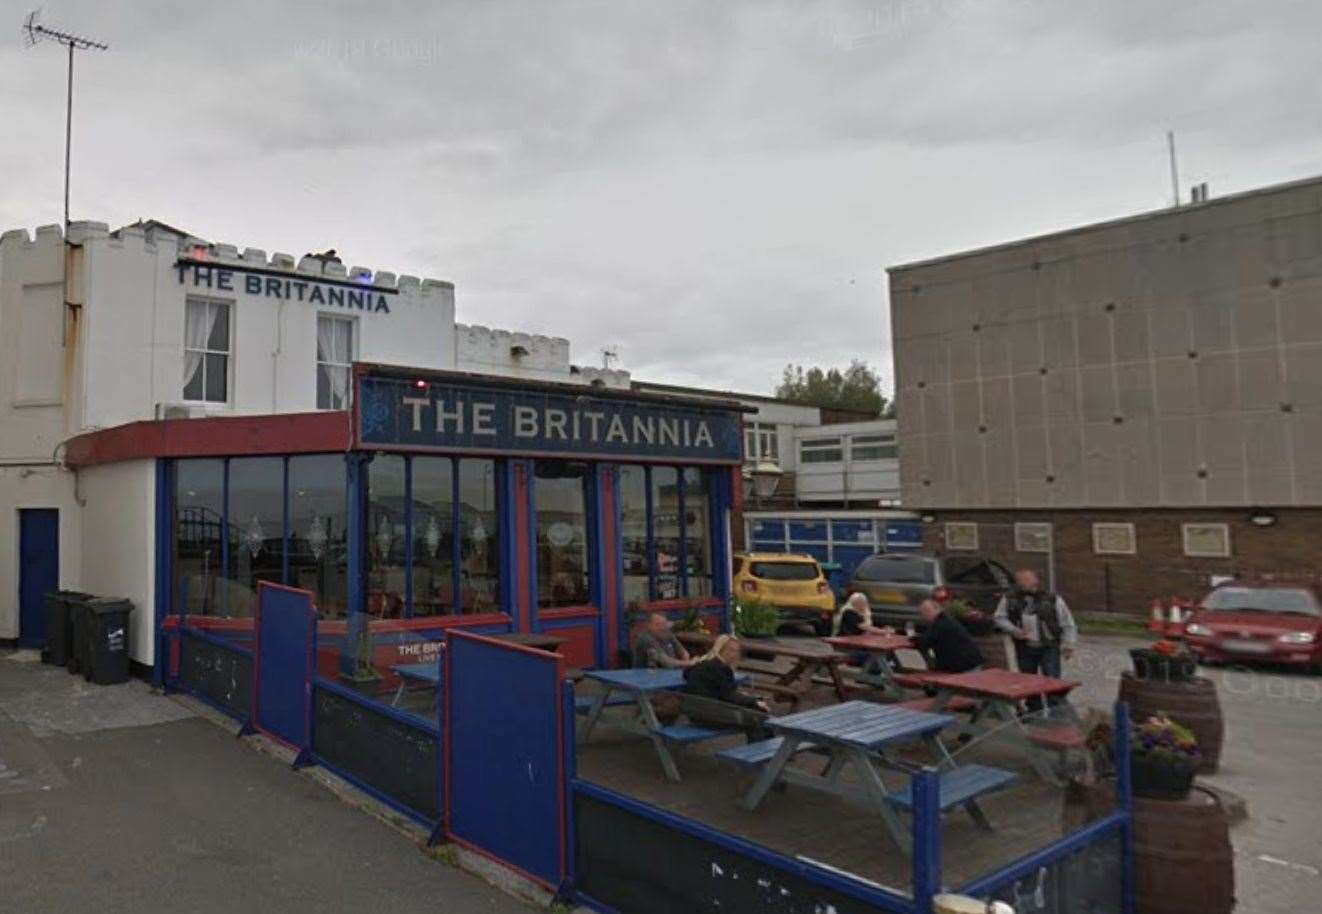 The Britannia in Margate dates back to as early as 1828